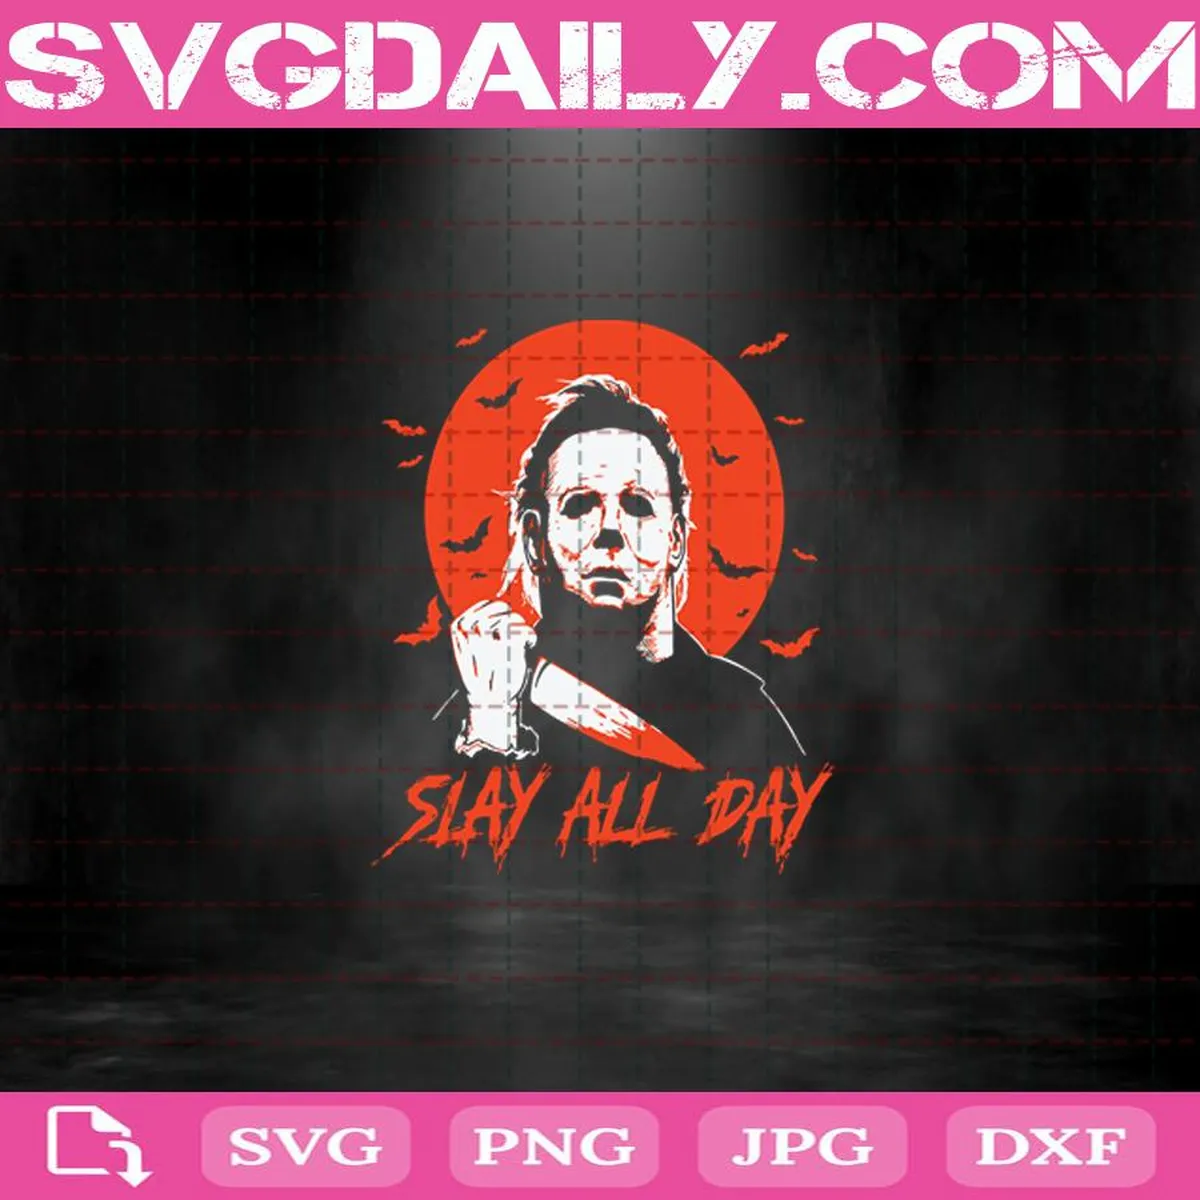 Slay All Day Svg, Halloween Horror Movies Svg, Michael Myers Halloween Svg Dxf Png Eps Cutting Cut File Silhouette Cricut